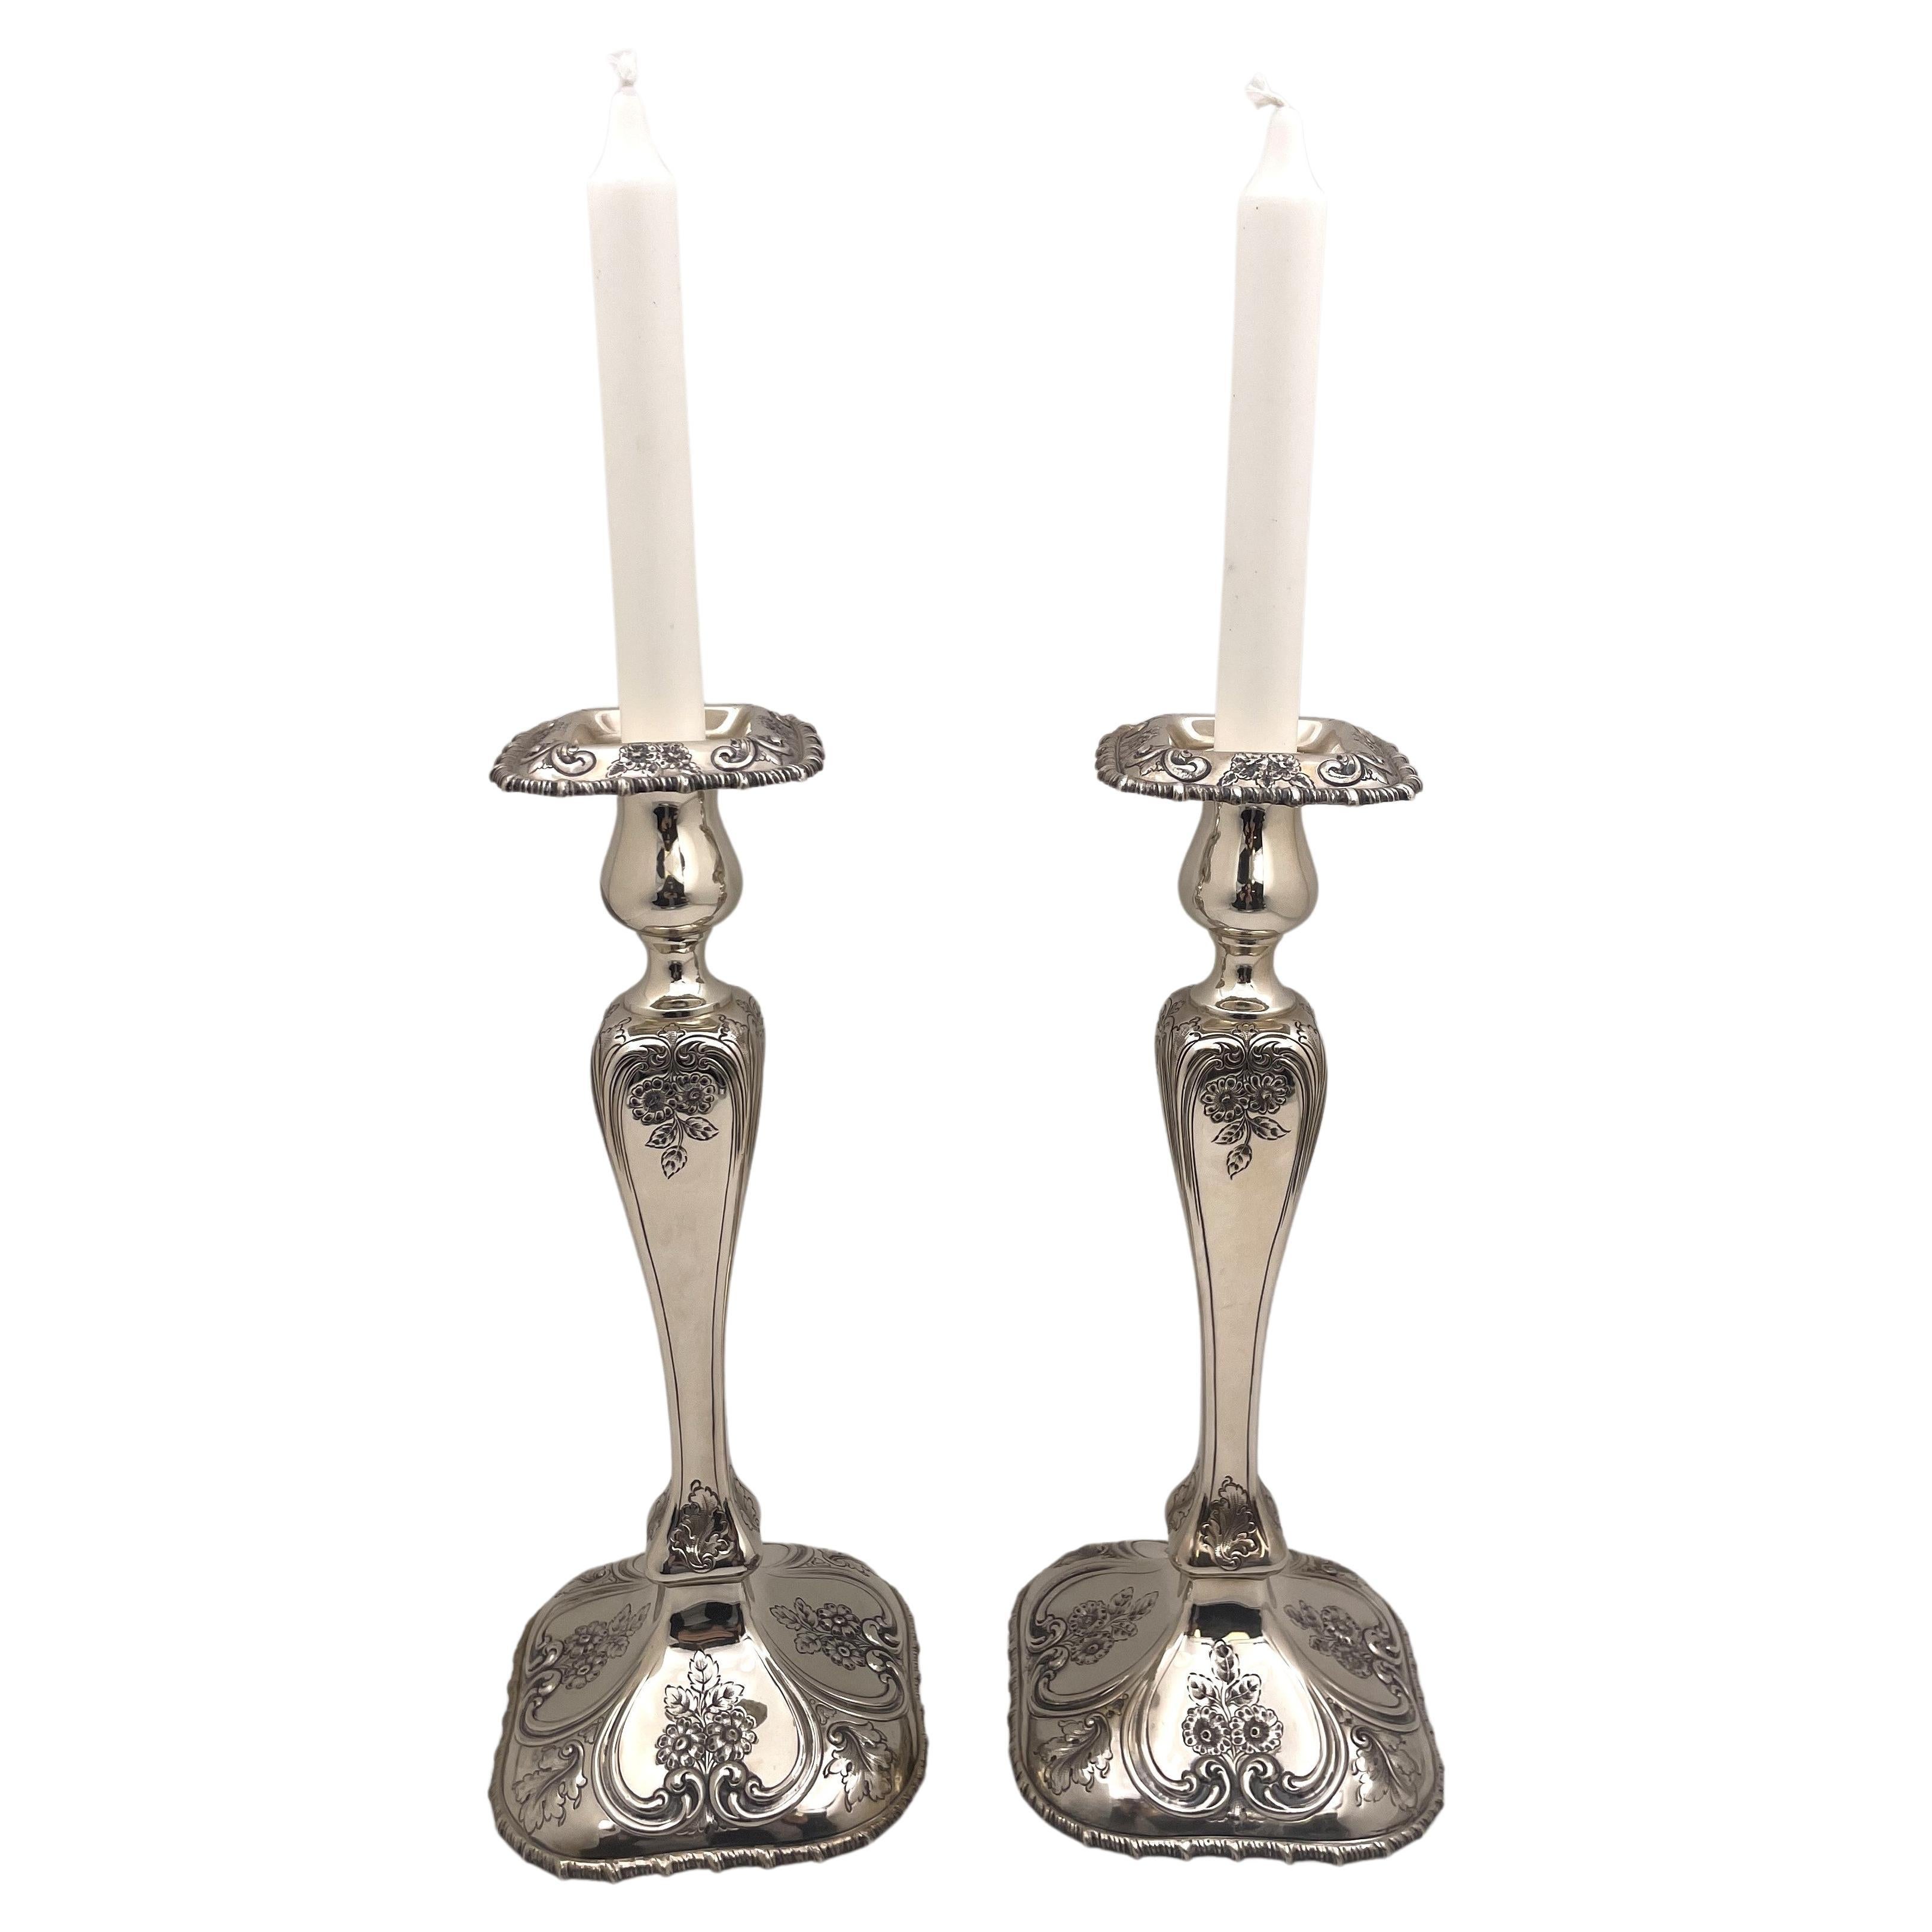 Shreve & Co. Pair of Sterling Silver Candlesticks in Art Nouveau Style For Sale